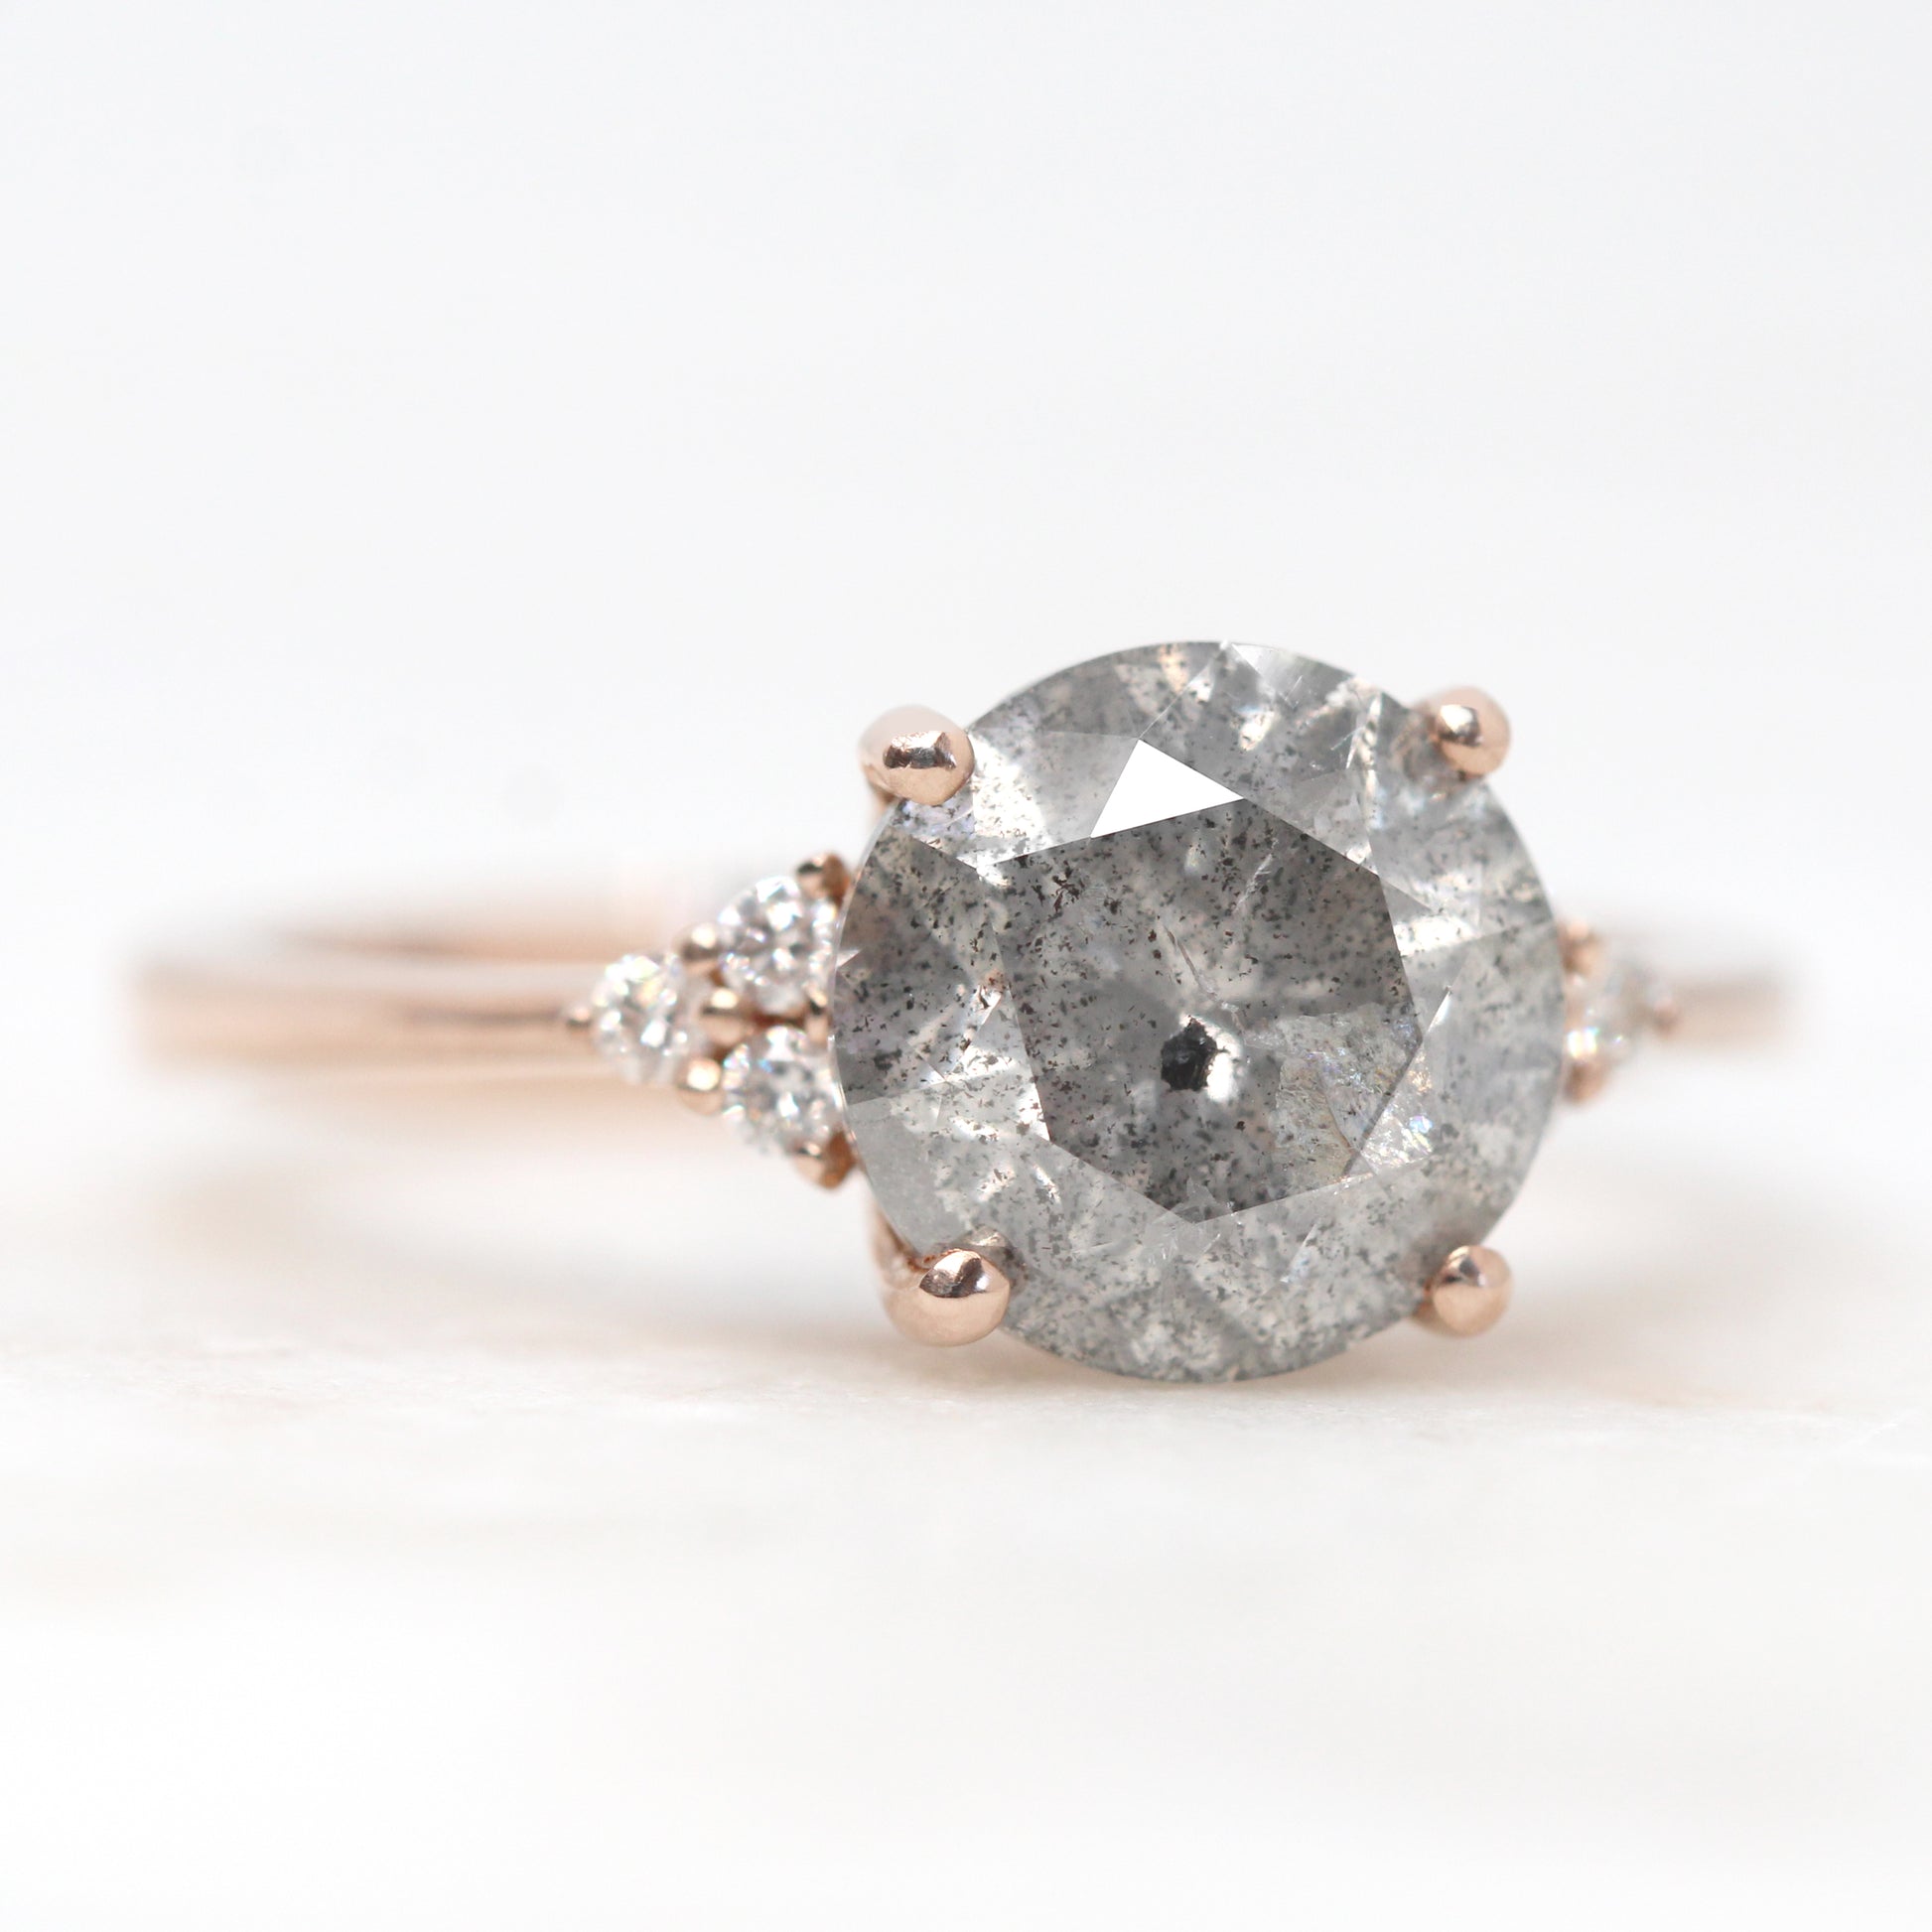 Imogene Ring with a 3.00 Carat Round Bright Gray Celestial Diamond and White Accent Diamonds in 14k Rose Gold - Ready to Size and Ship - Midwinter Co. Alternative Bridal Rings and Modern Fine Jewelry